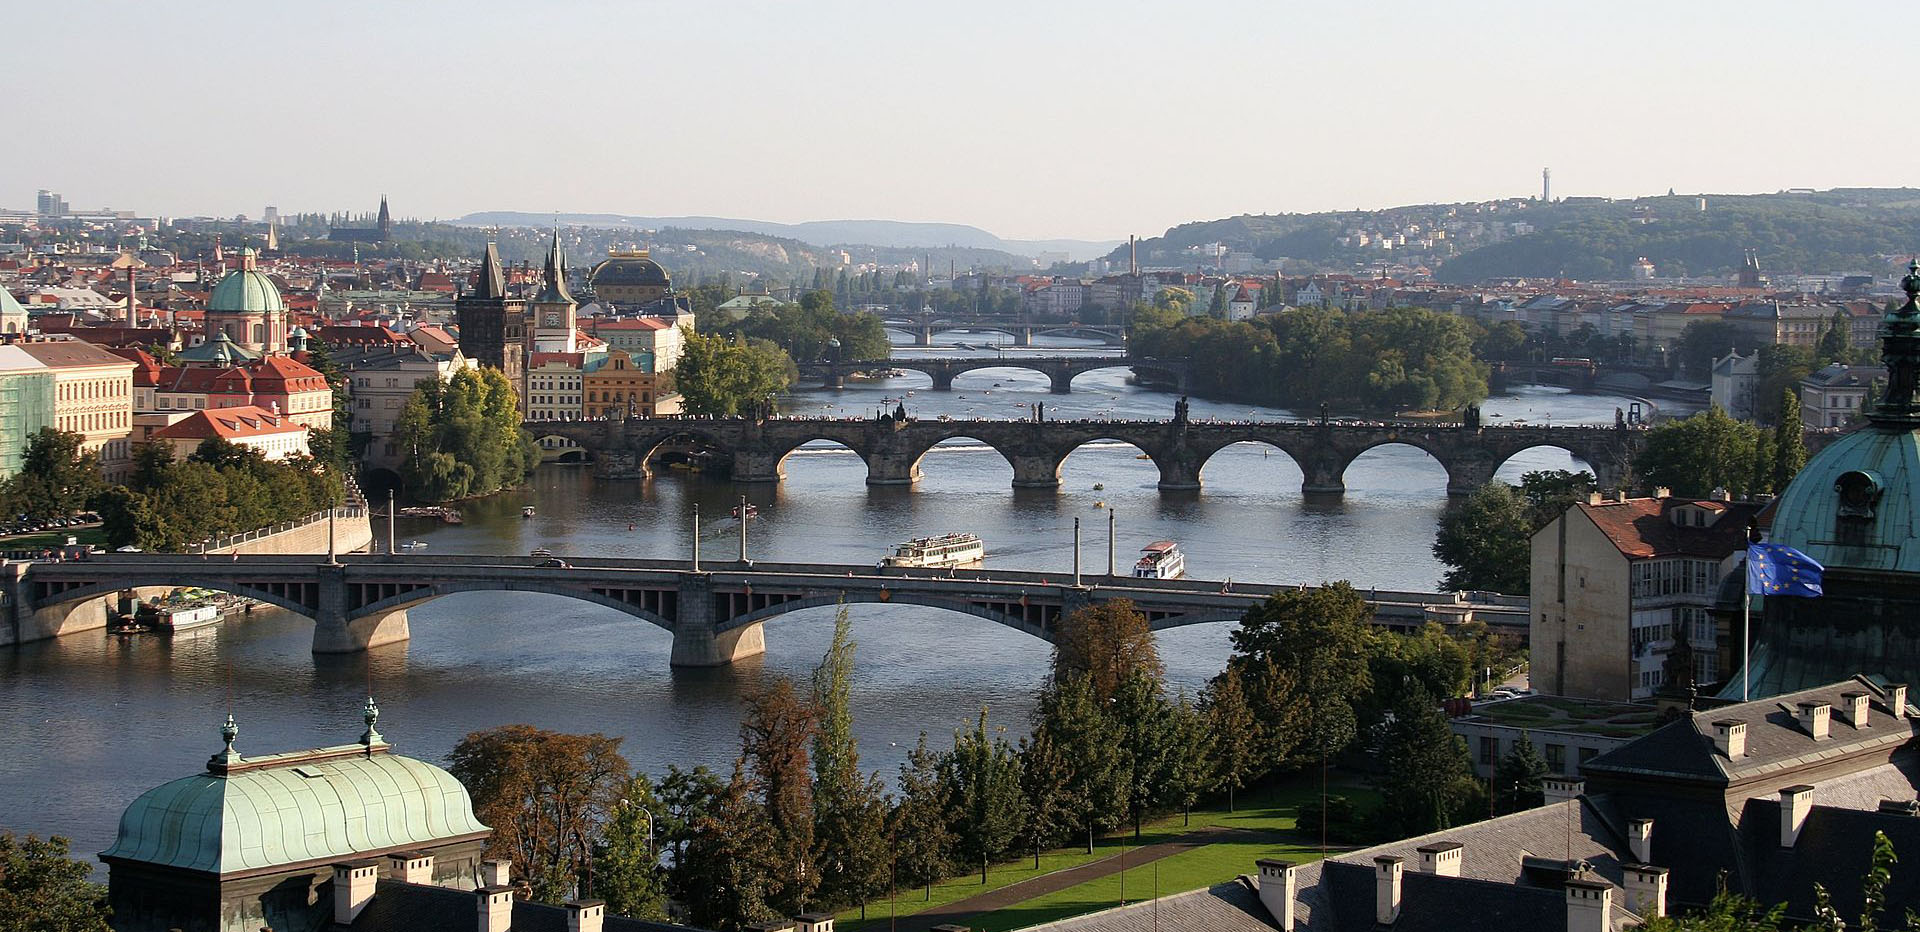 WordCamp Prague 2015 Aims to Bring Central European Tech Community Together